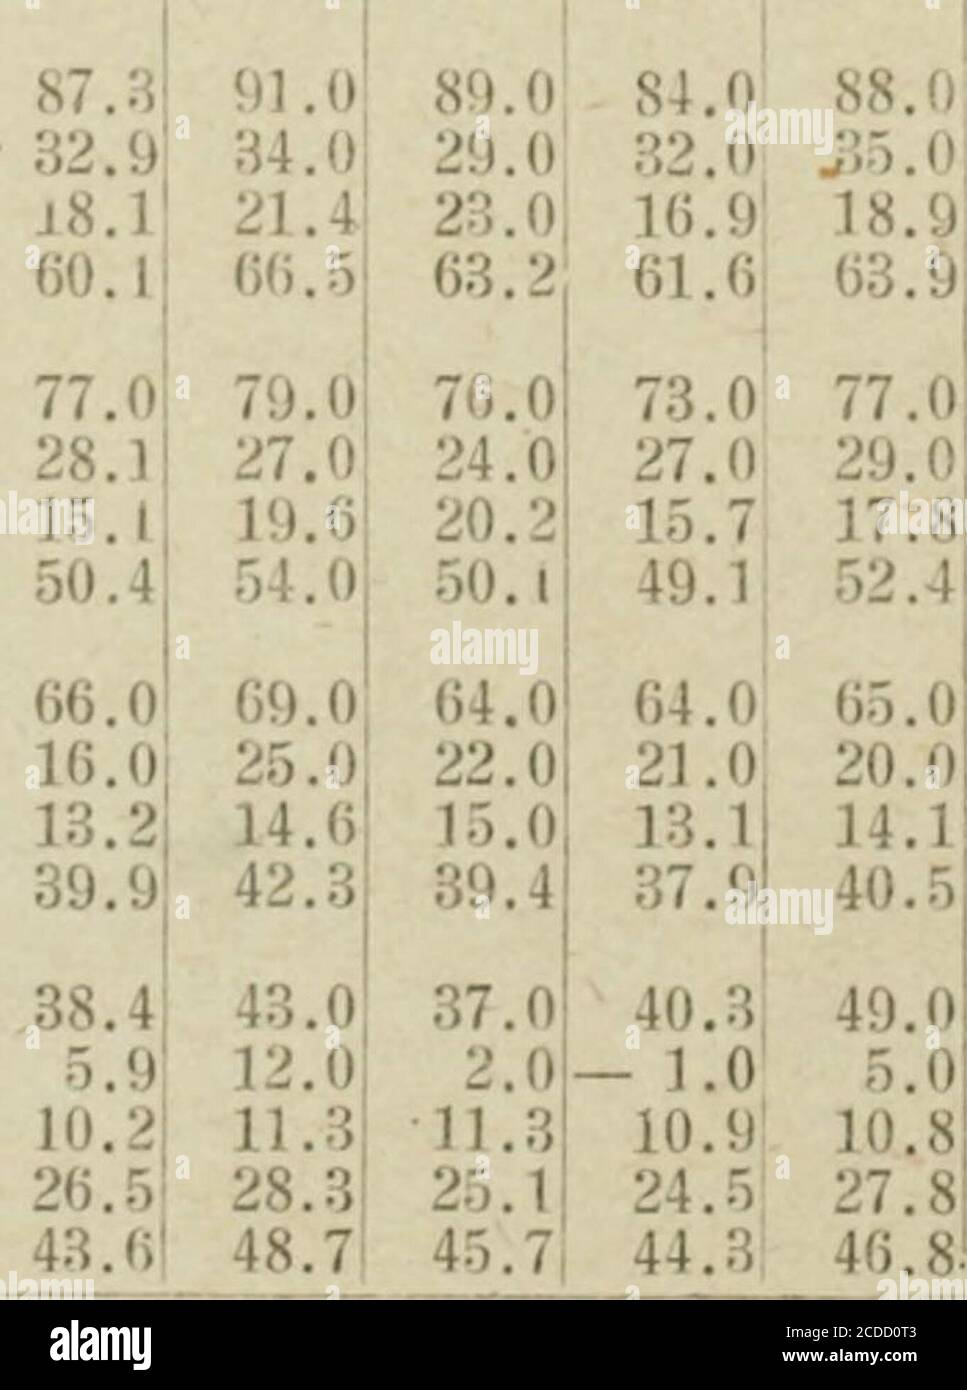 . Ontario Sessional Papers, 1916, No.38-46 . Highest Lowest , Daily range... Monthly mean.September: Highest Lowest Daily range.. Monthly mean.October: Highest Lowest Daily range.. Monthly mean.November: Highest Lowest Daily range... Monthly mean.December: Highest Lowest Daily range... Monthly mean.Annual mean.... d o *j A , B a ci a Xi M 3 c3 1 o •^ cq ^ t •T3 40.4- 0.113.320.9 -86. Oj86.119.957.8! 82.946.2 68.9 82.938.6 42.Qi-17.Ol-io.2j21.8: 41.0 -21.0 i7.2 19.2 cc 4^ CO t-l s JQ a ci « &gt; CB u *J ! ^ O ! 42.5 46.Oi 46.7 40.6 —18.01— 3.0— 1.0—17.0 16.0 18.7 14.l 18.4 18.3 23.4 23.7 17.3 4 Stock Photo